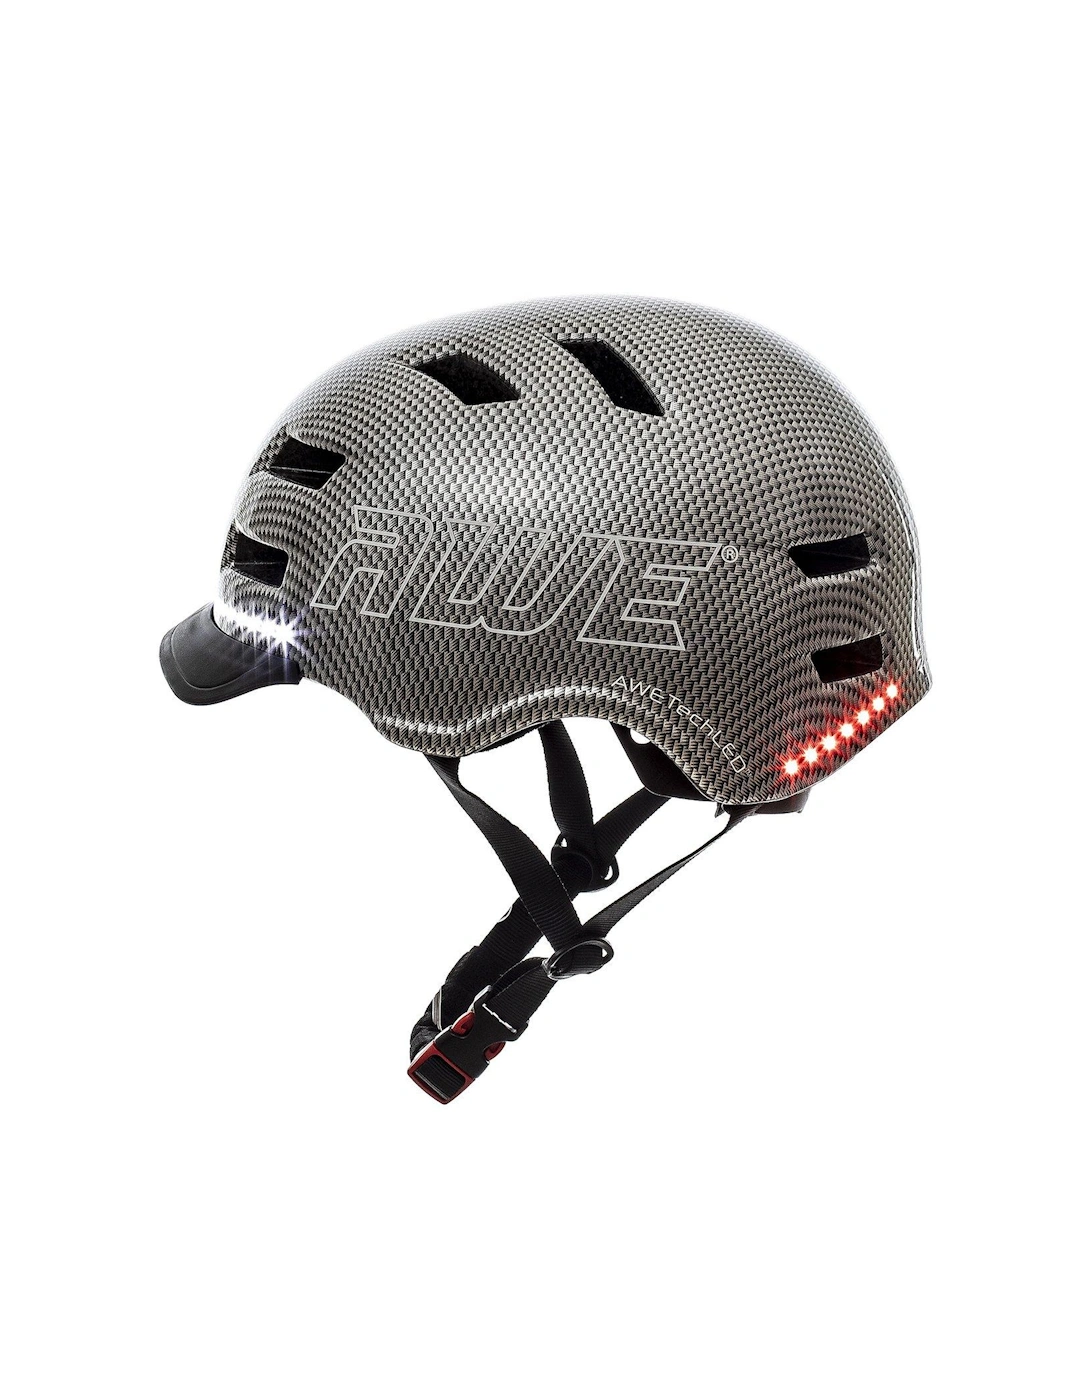 E Bike/Scooter/Bicycle Adult Helmet - 58-60cm, Graphite Grey CE, 2 of 1